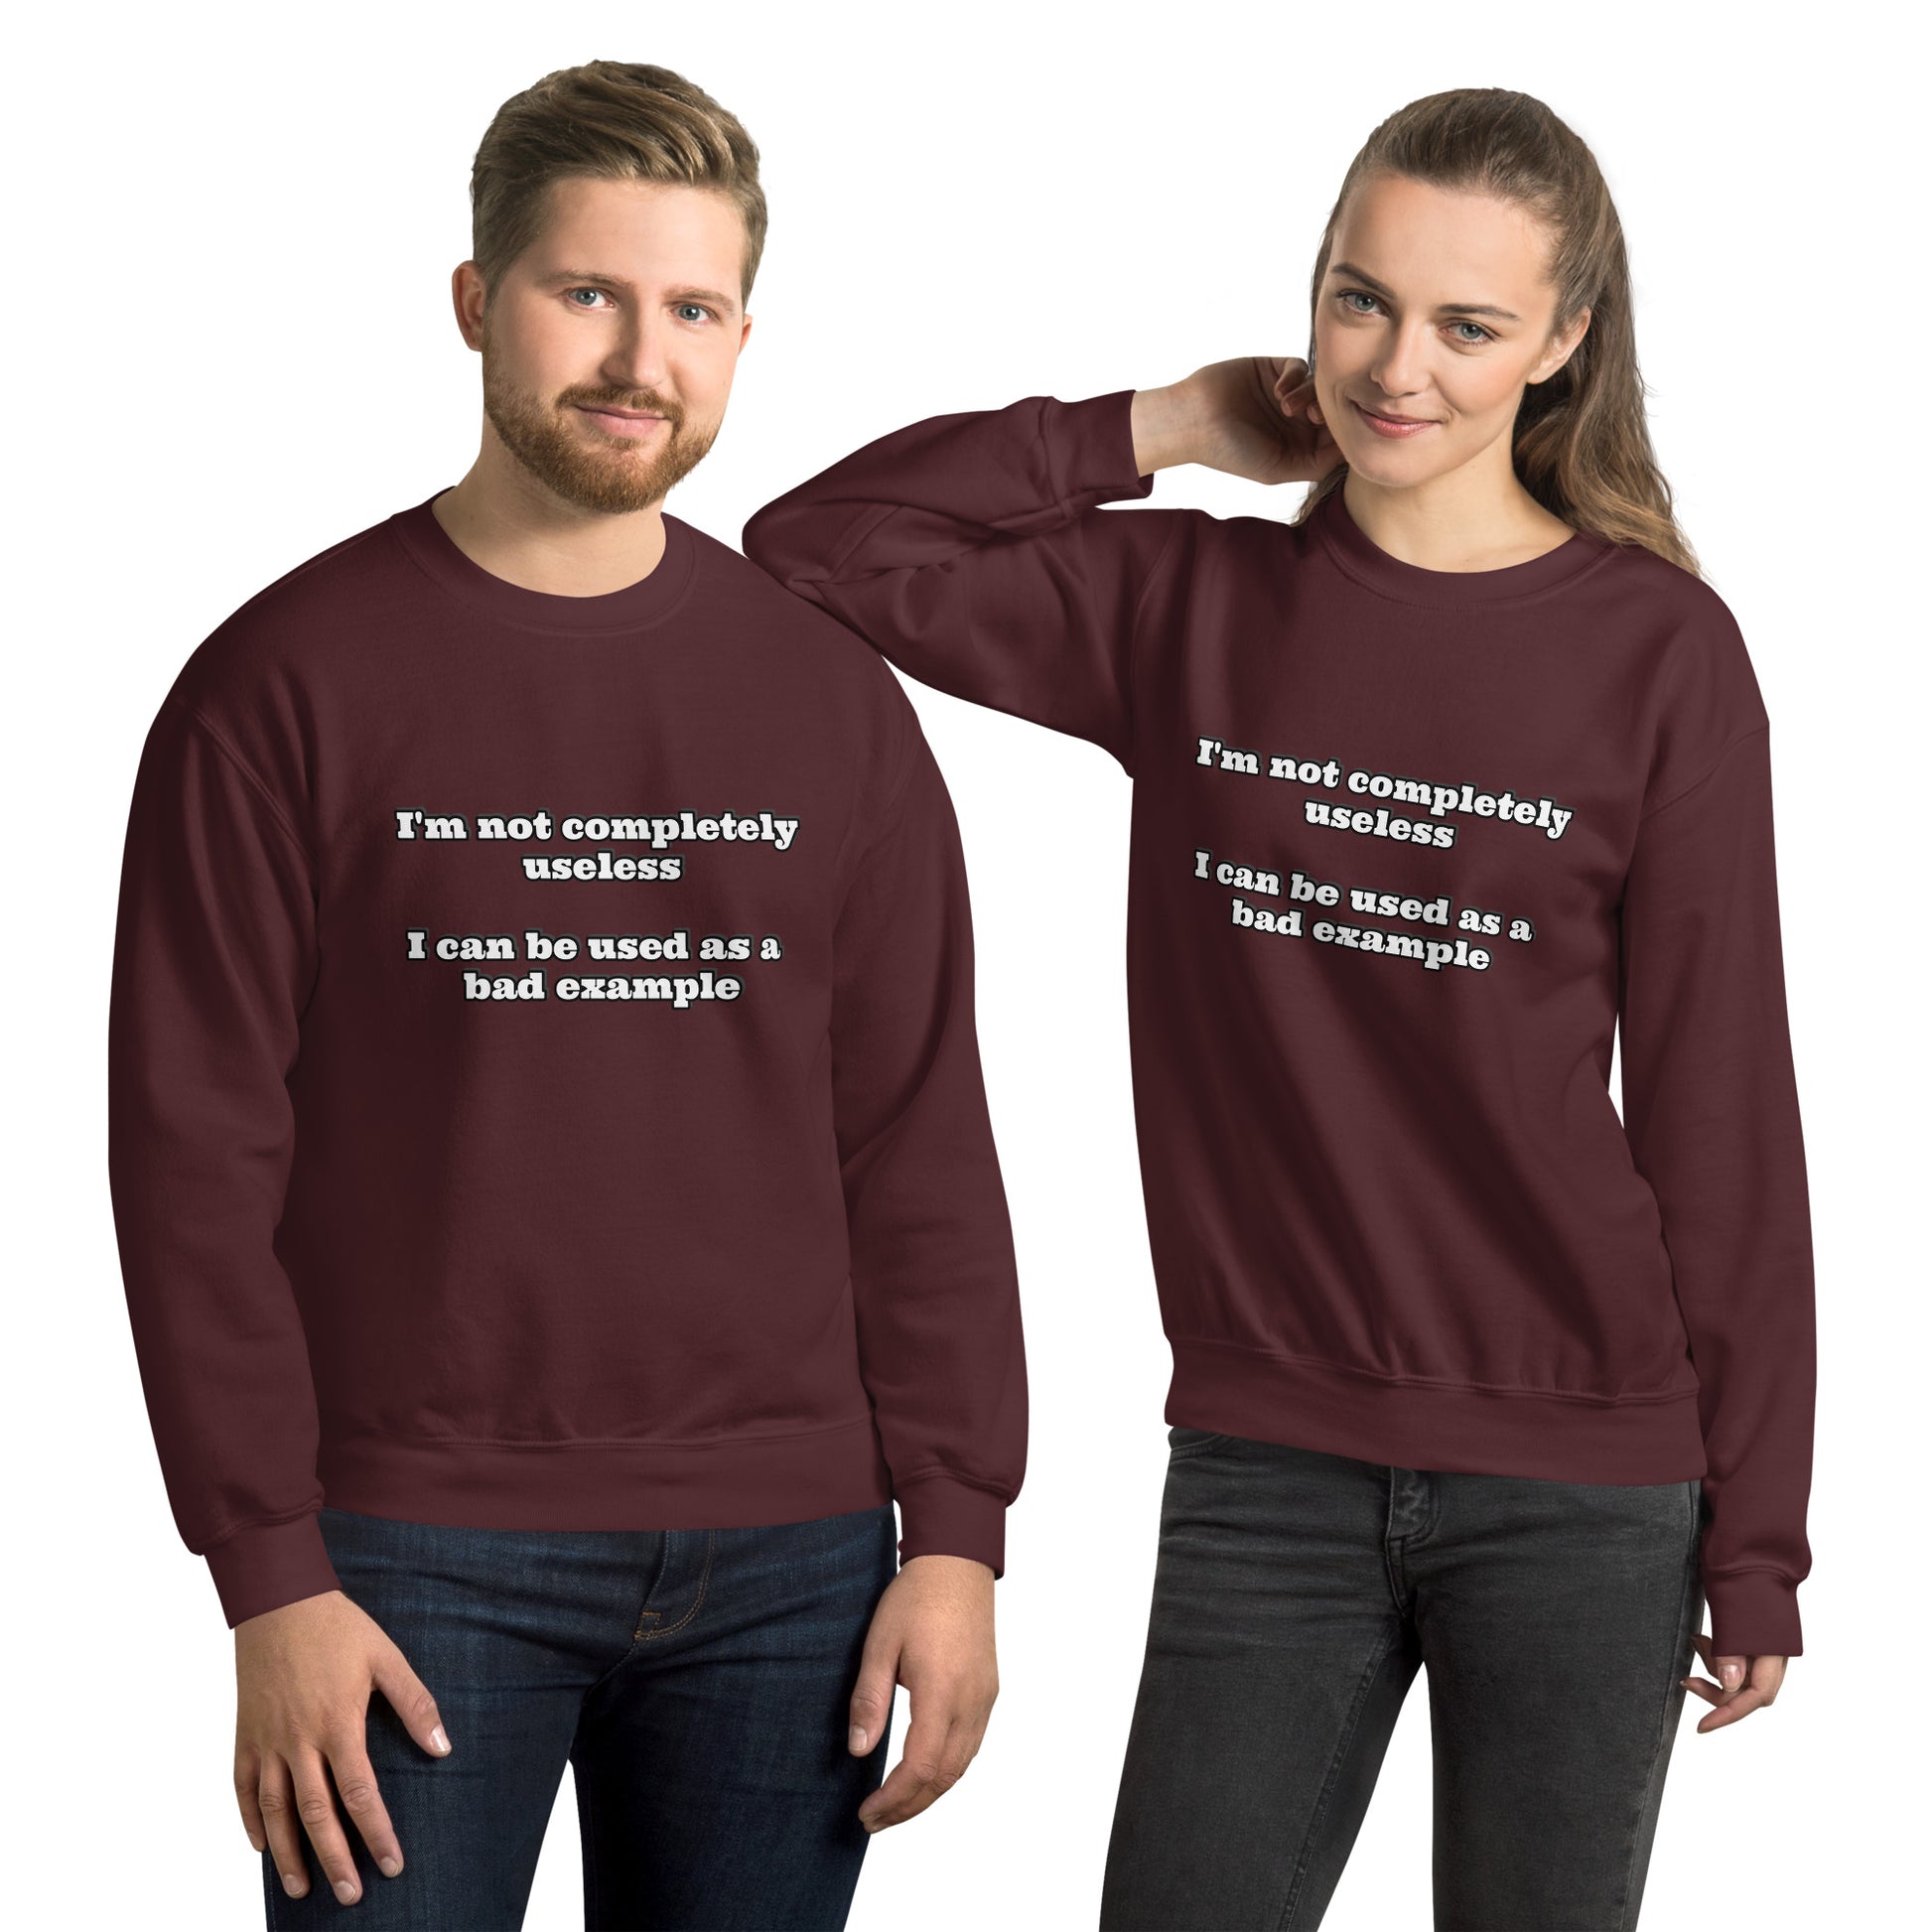 Man and women with maroon sweatshirt with text “I'm not completely useless I can be used as a bad example”